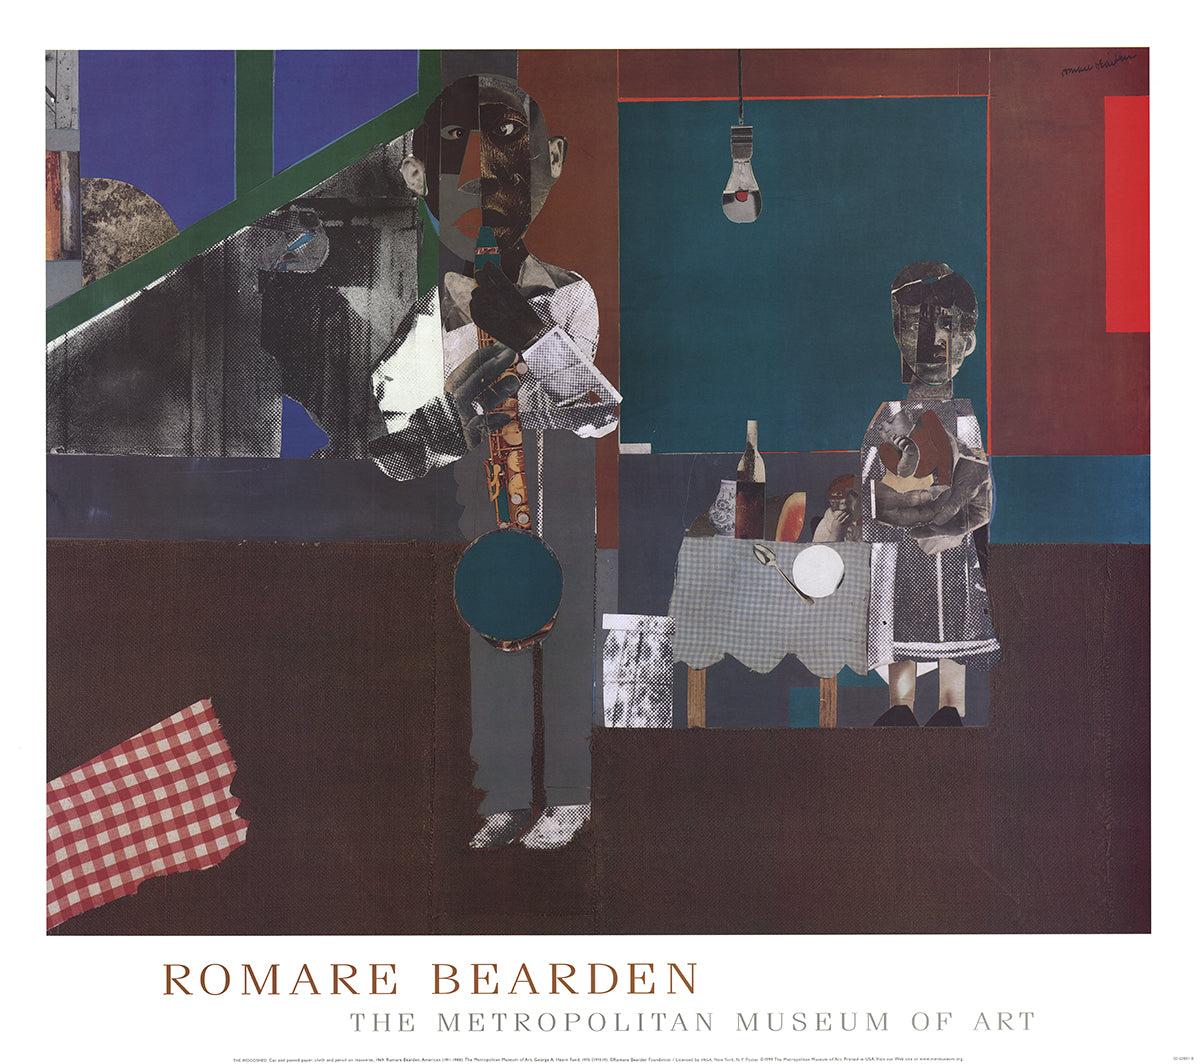 Paper Size: 30 x 34 inches ( 76.2 x 86.36 cm )
Image Size: 25 x 31.25 inches ( 63.5 x 79.375 cm )
Framed: No
Condition: A: Mint

Additional Details: Original exhibition poster for a Romare Bearden exhibition presented at the Metropolitan Museum in